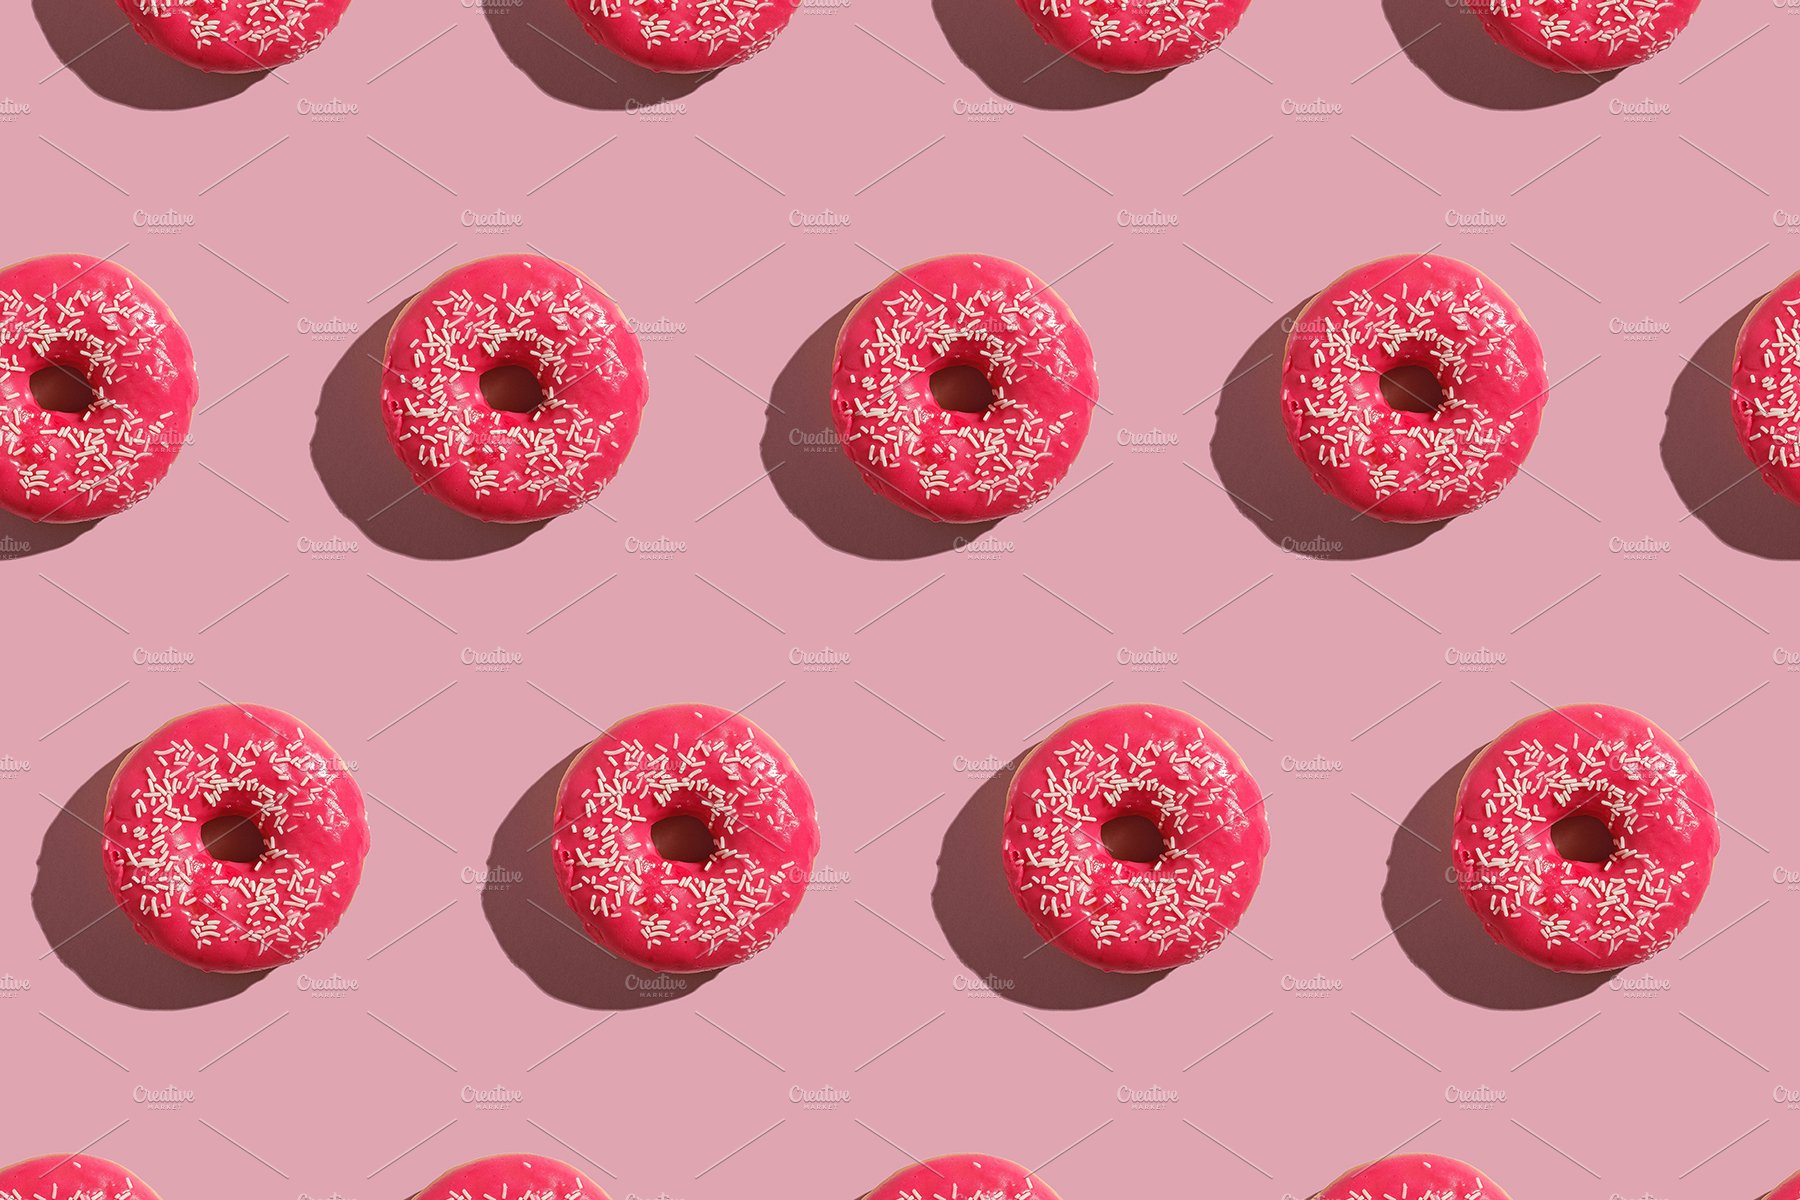 Pink donut patterns preview image.